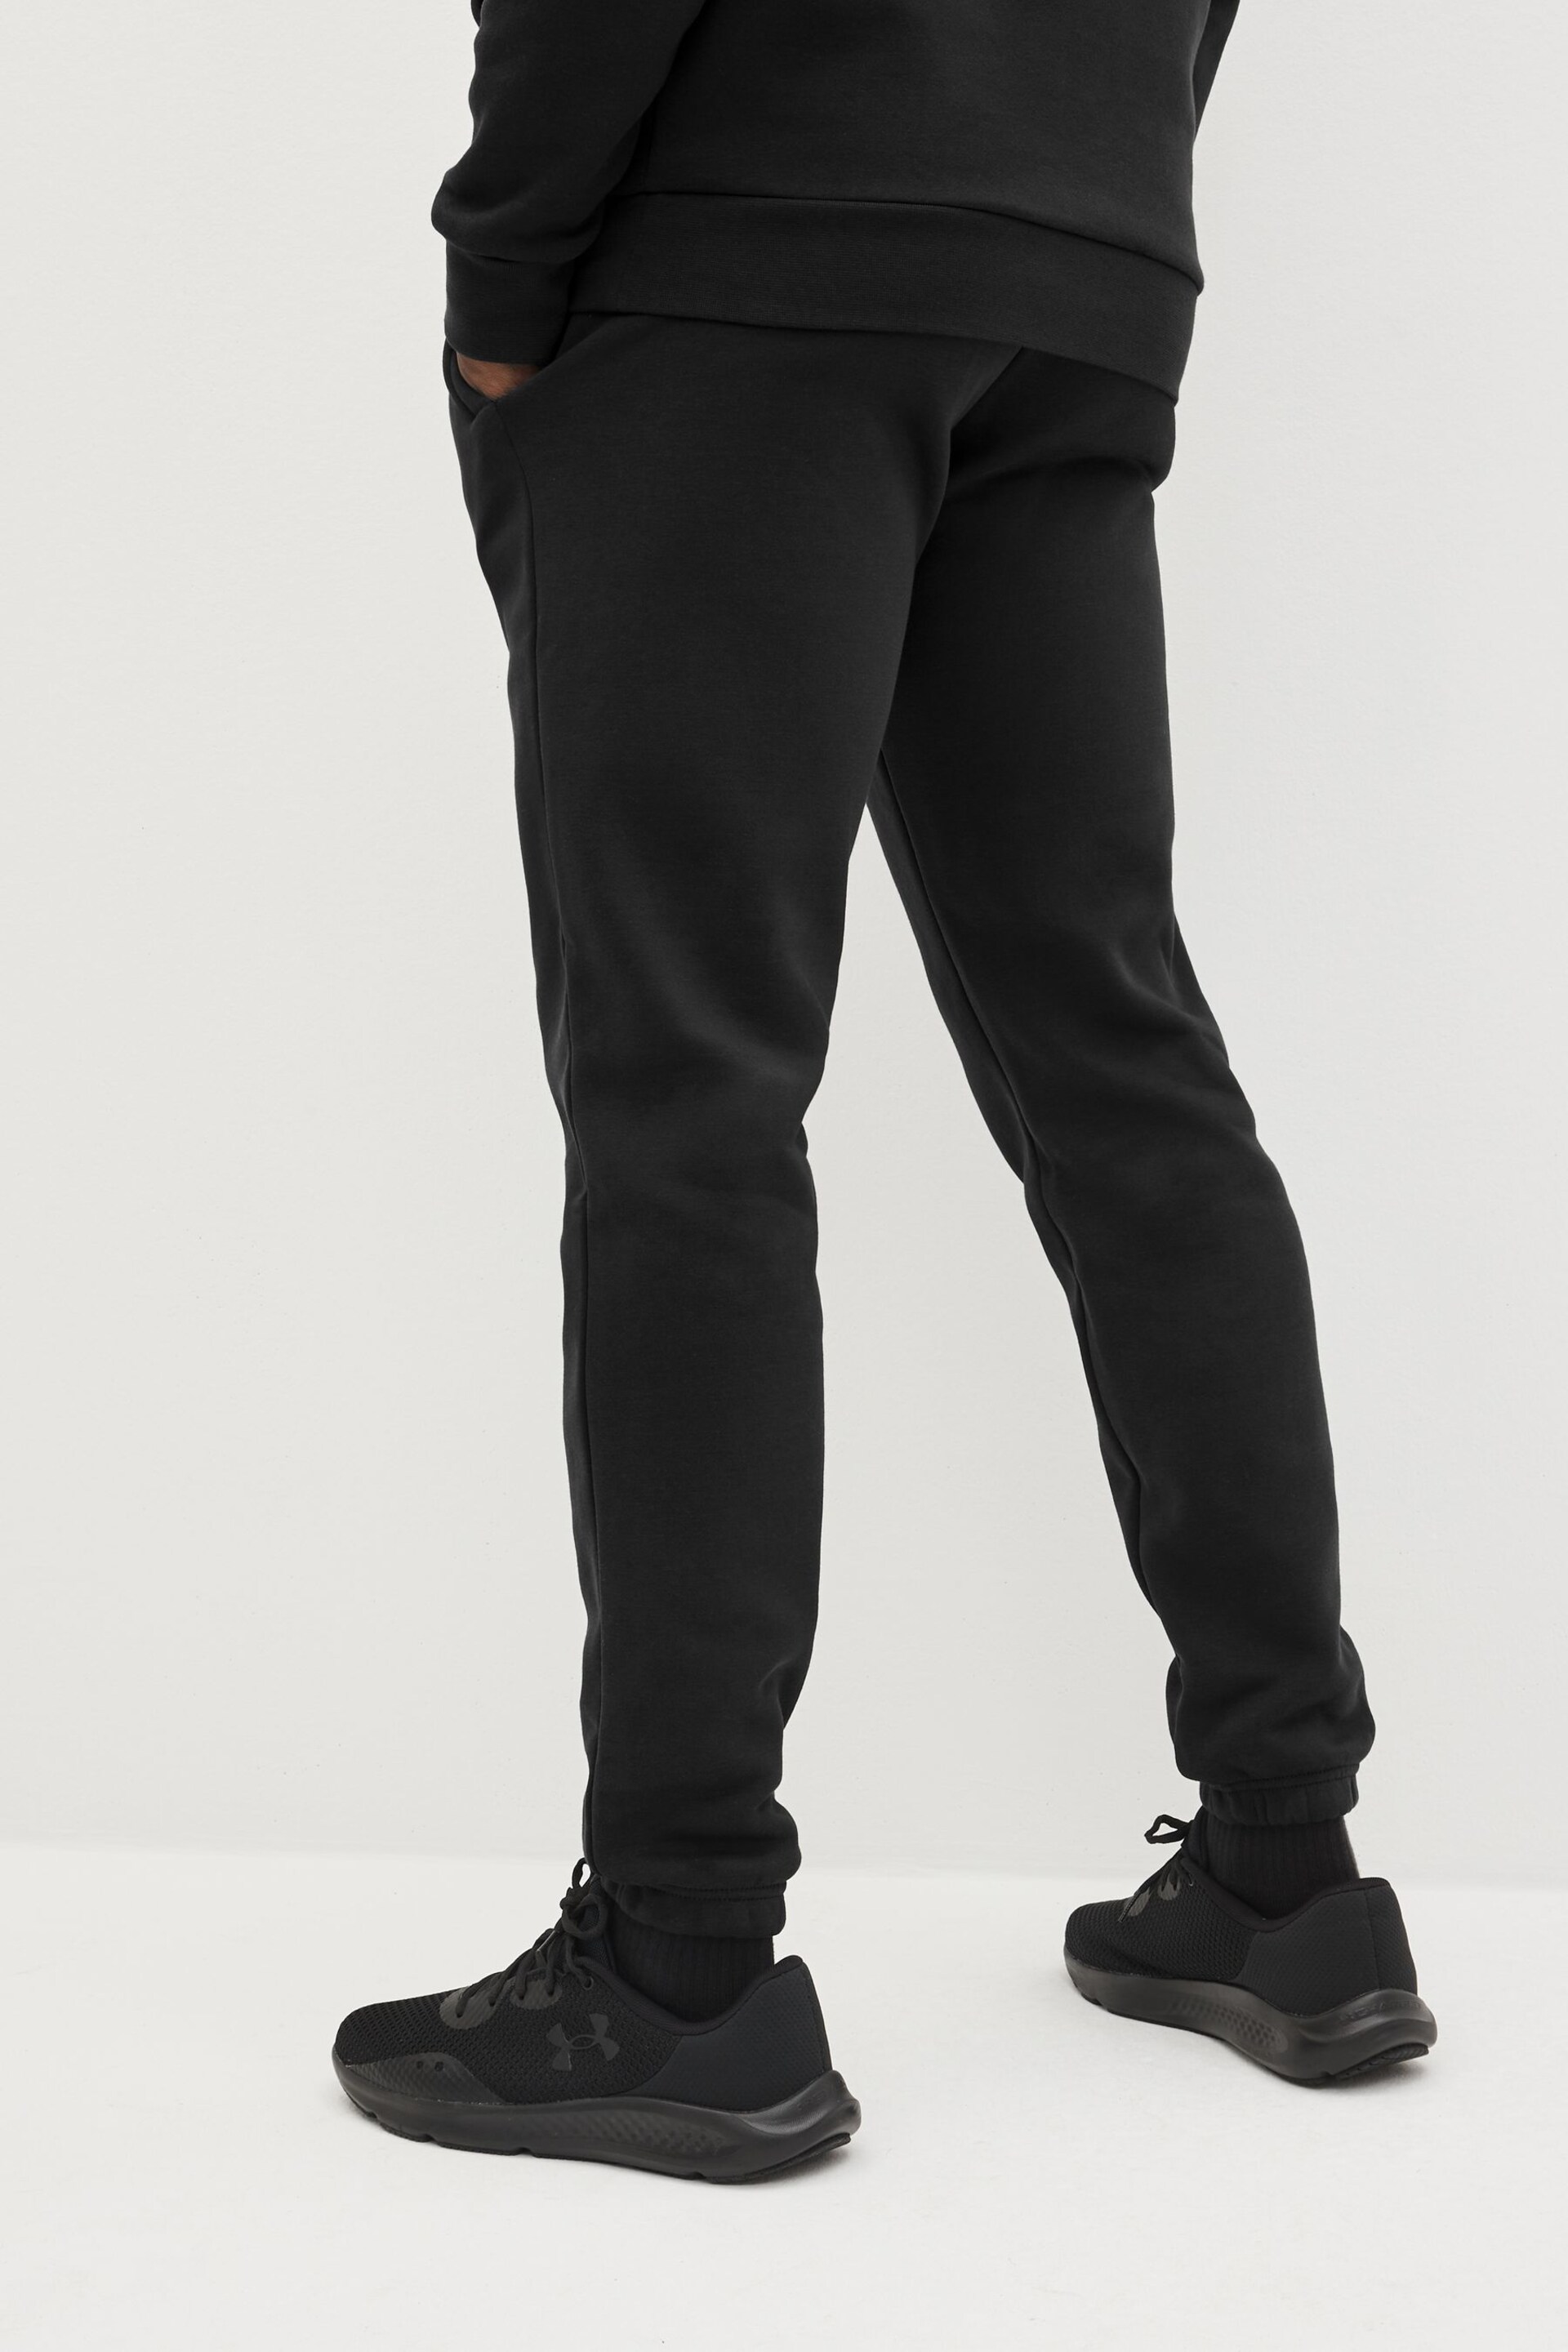 Under Armour Black Essential Joggers - Image 2 of 6